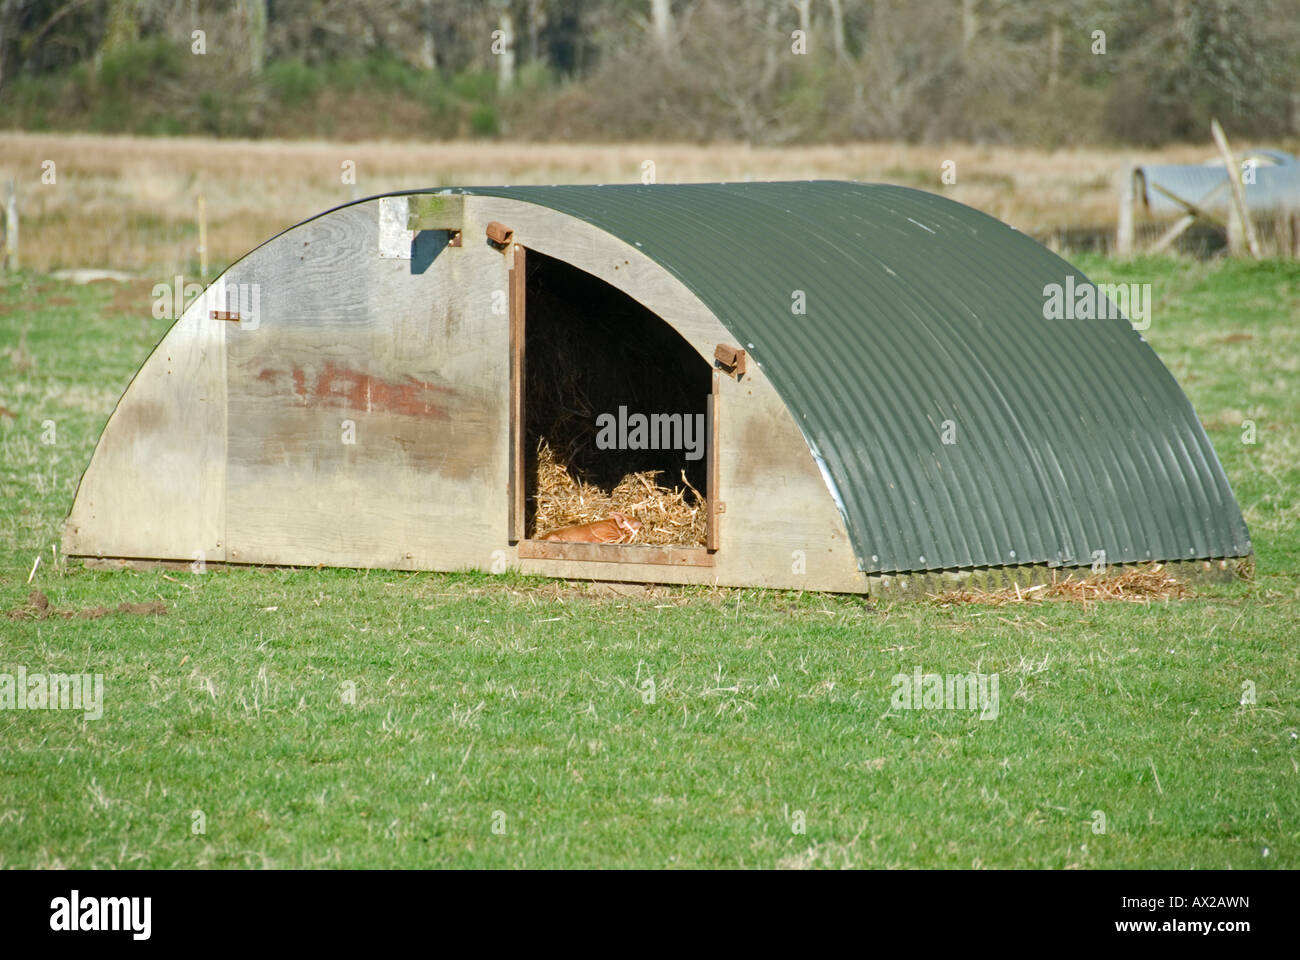 Stock photo of a galvanised metal pig Ark in a field The photo was taken in the Limousin region of France Stock Photo